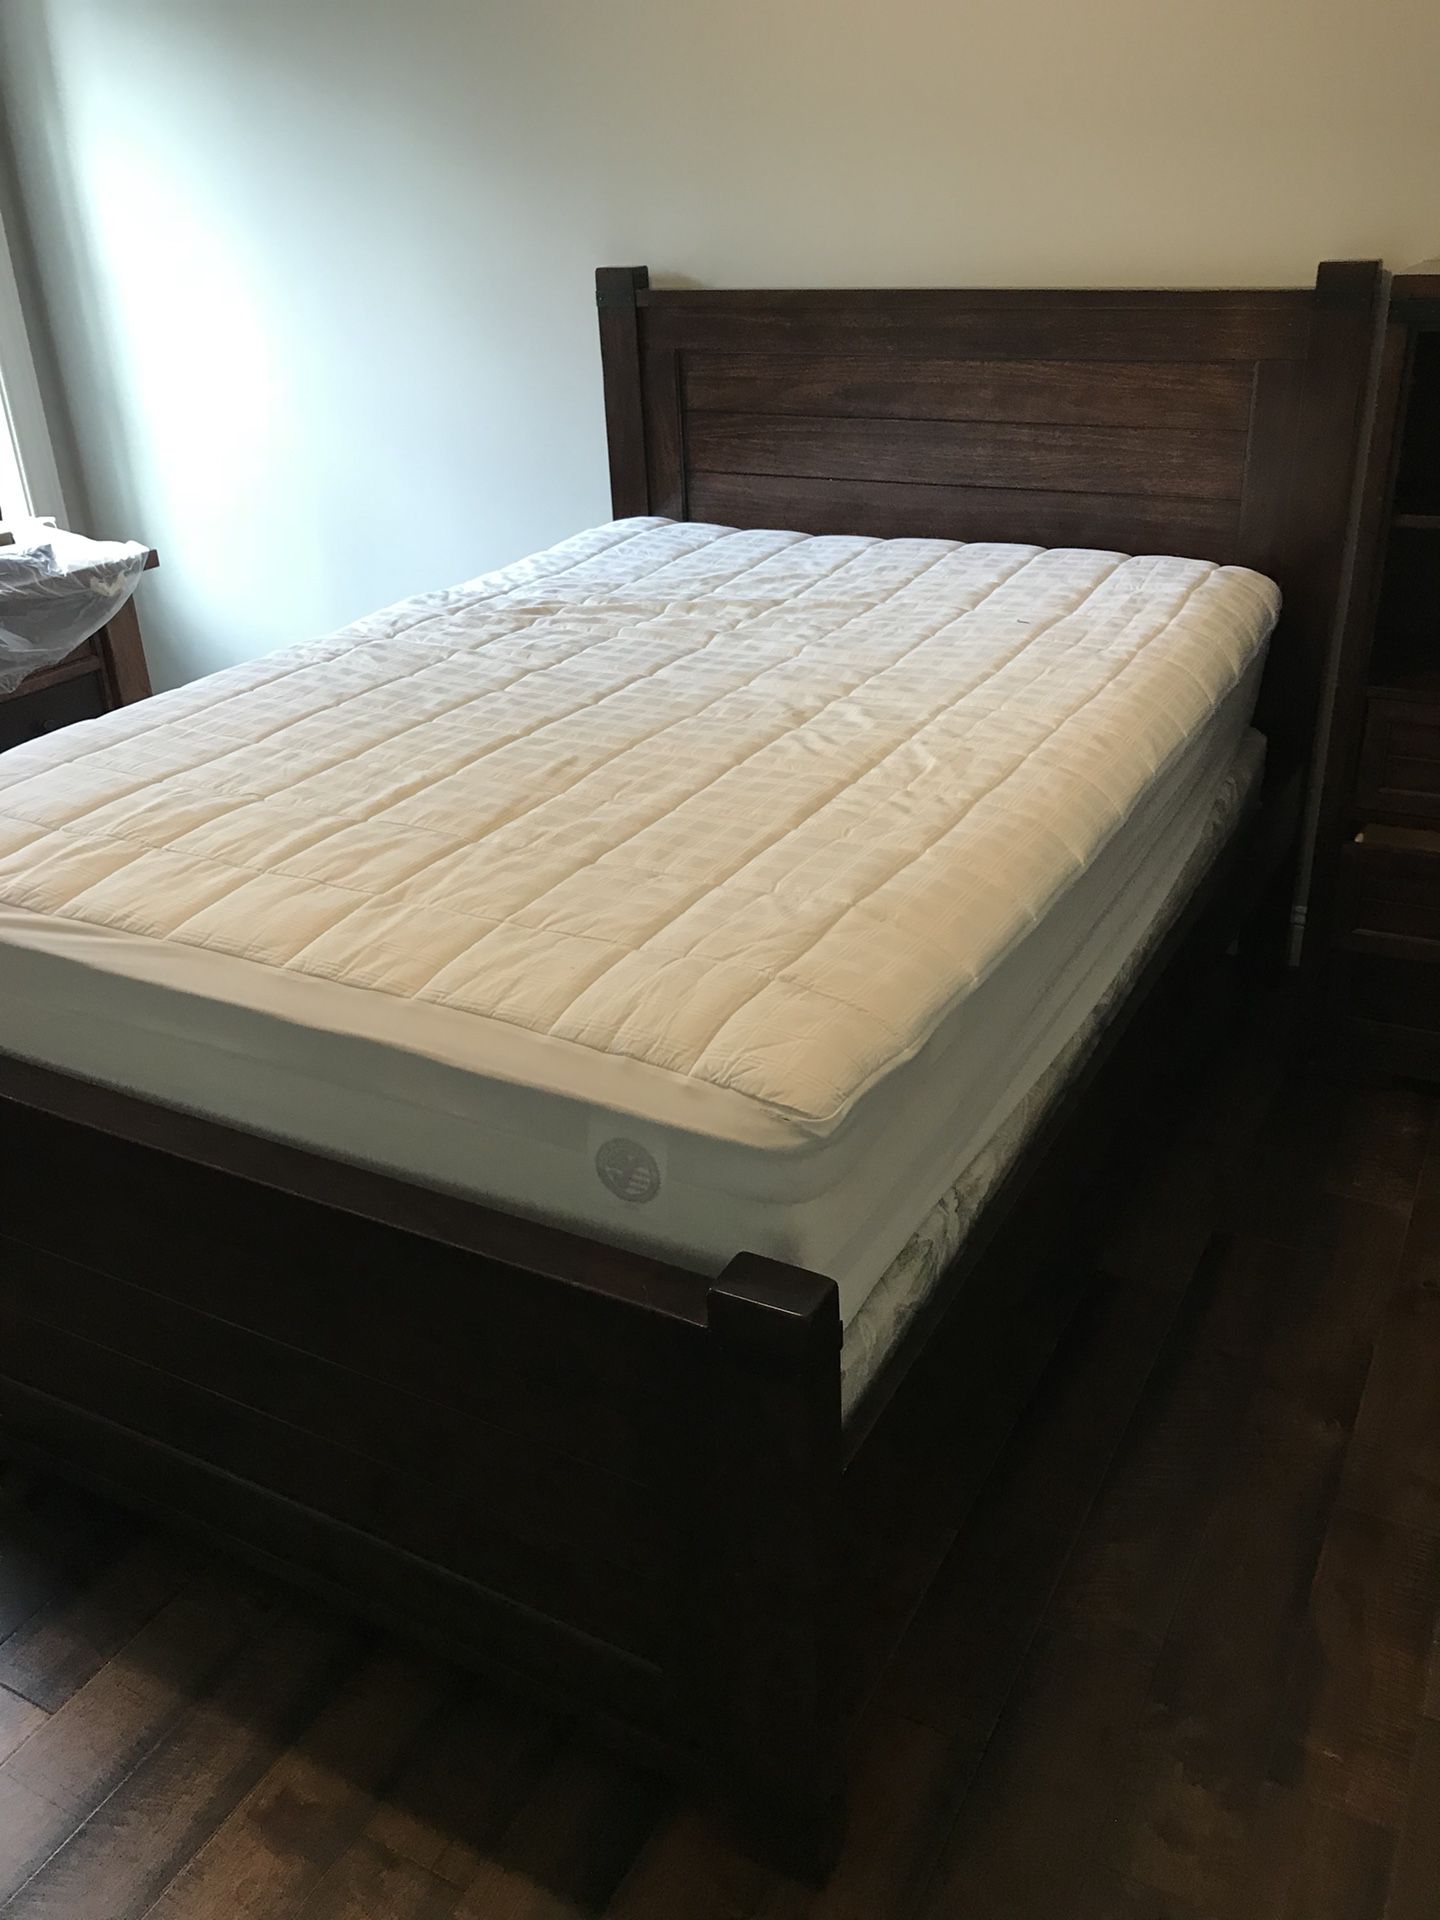 Full bed (with storage drawers) and side dresser